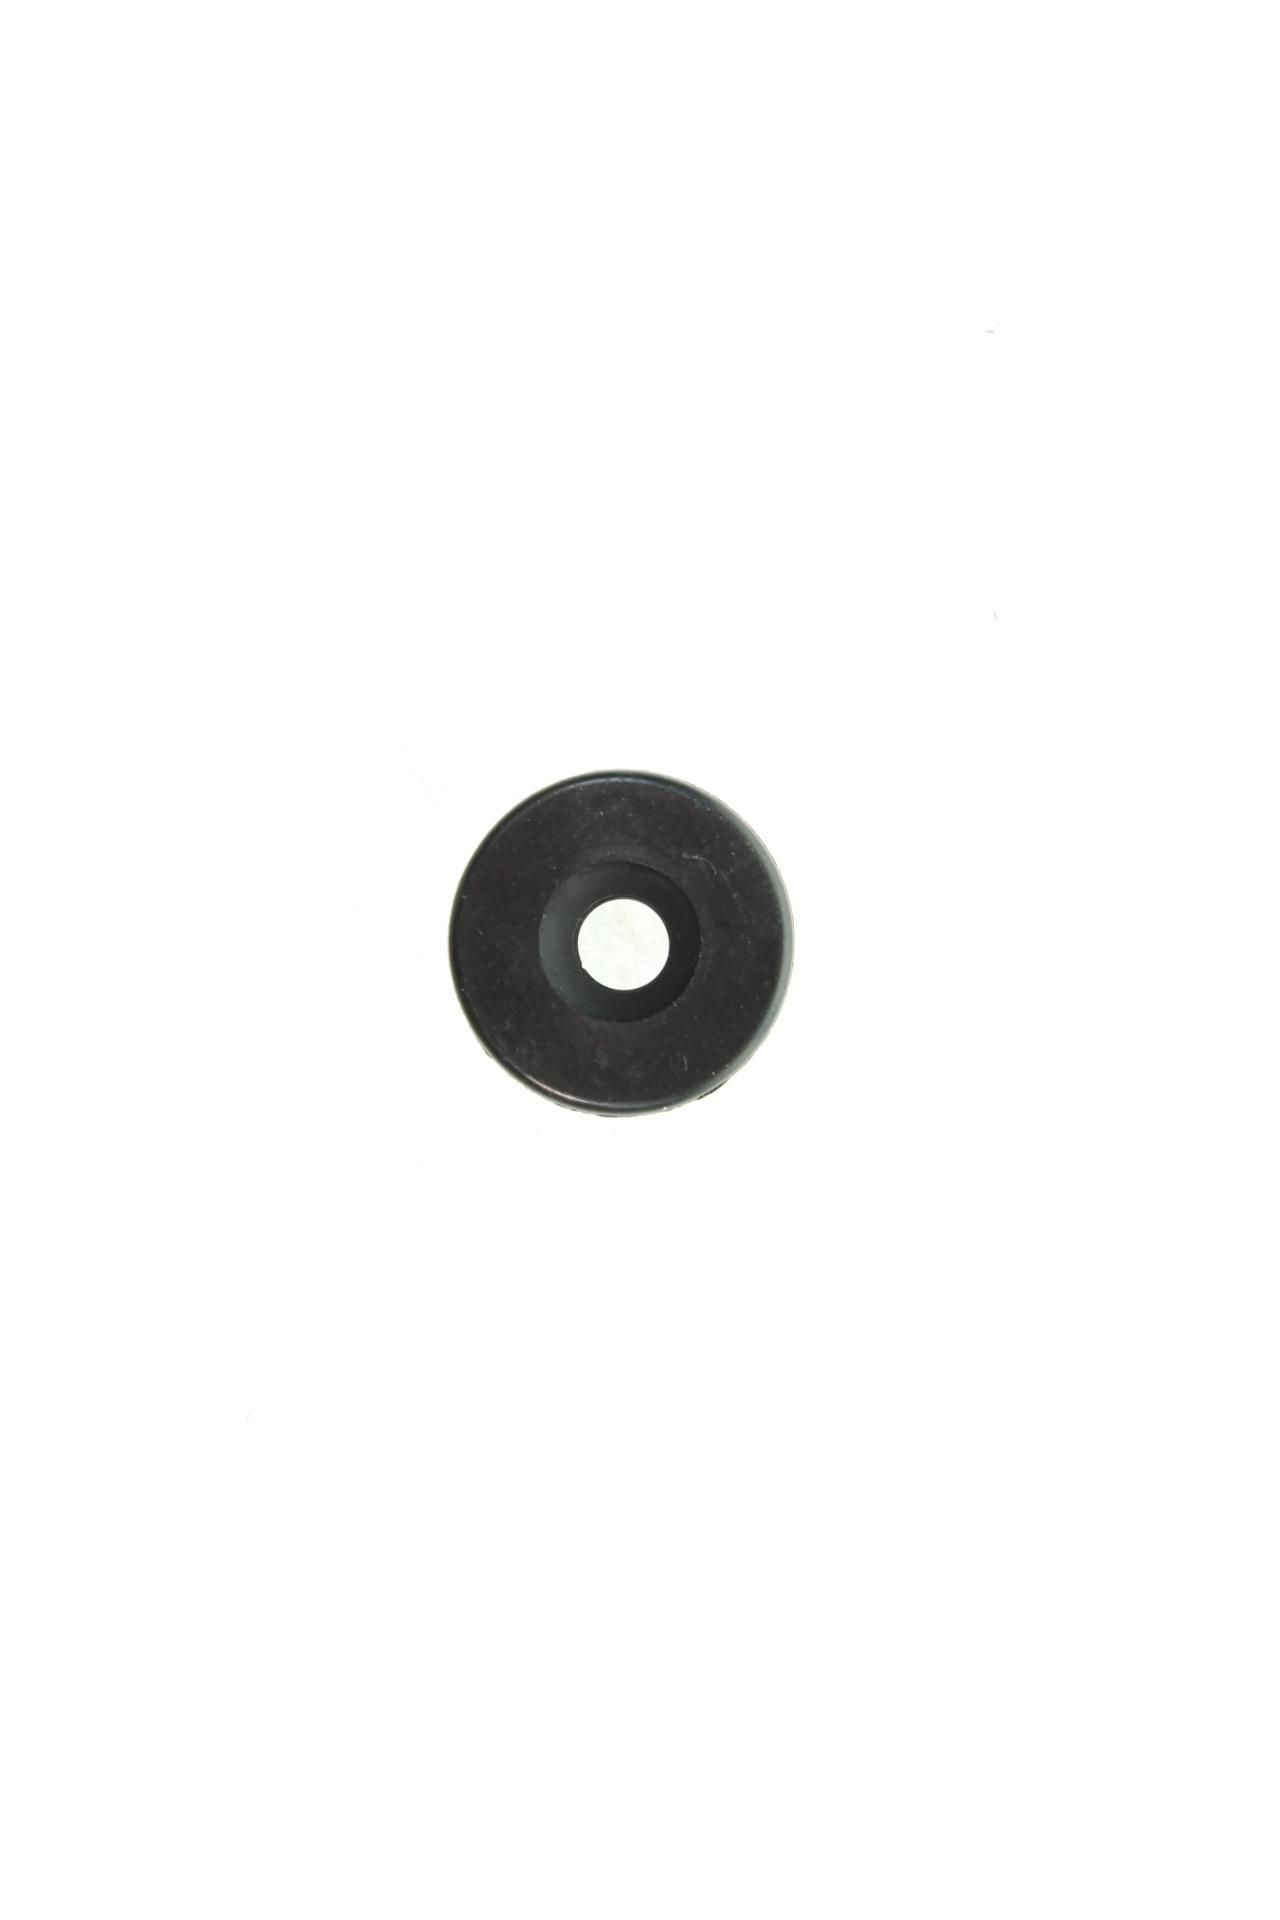 90480-12446-00 Superseded by 2GH-1111G-00-00 - RUBBER,MOUNT 1